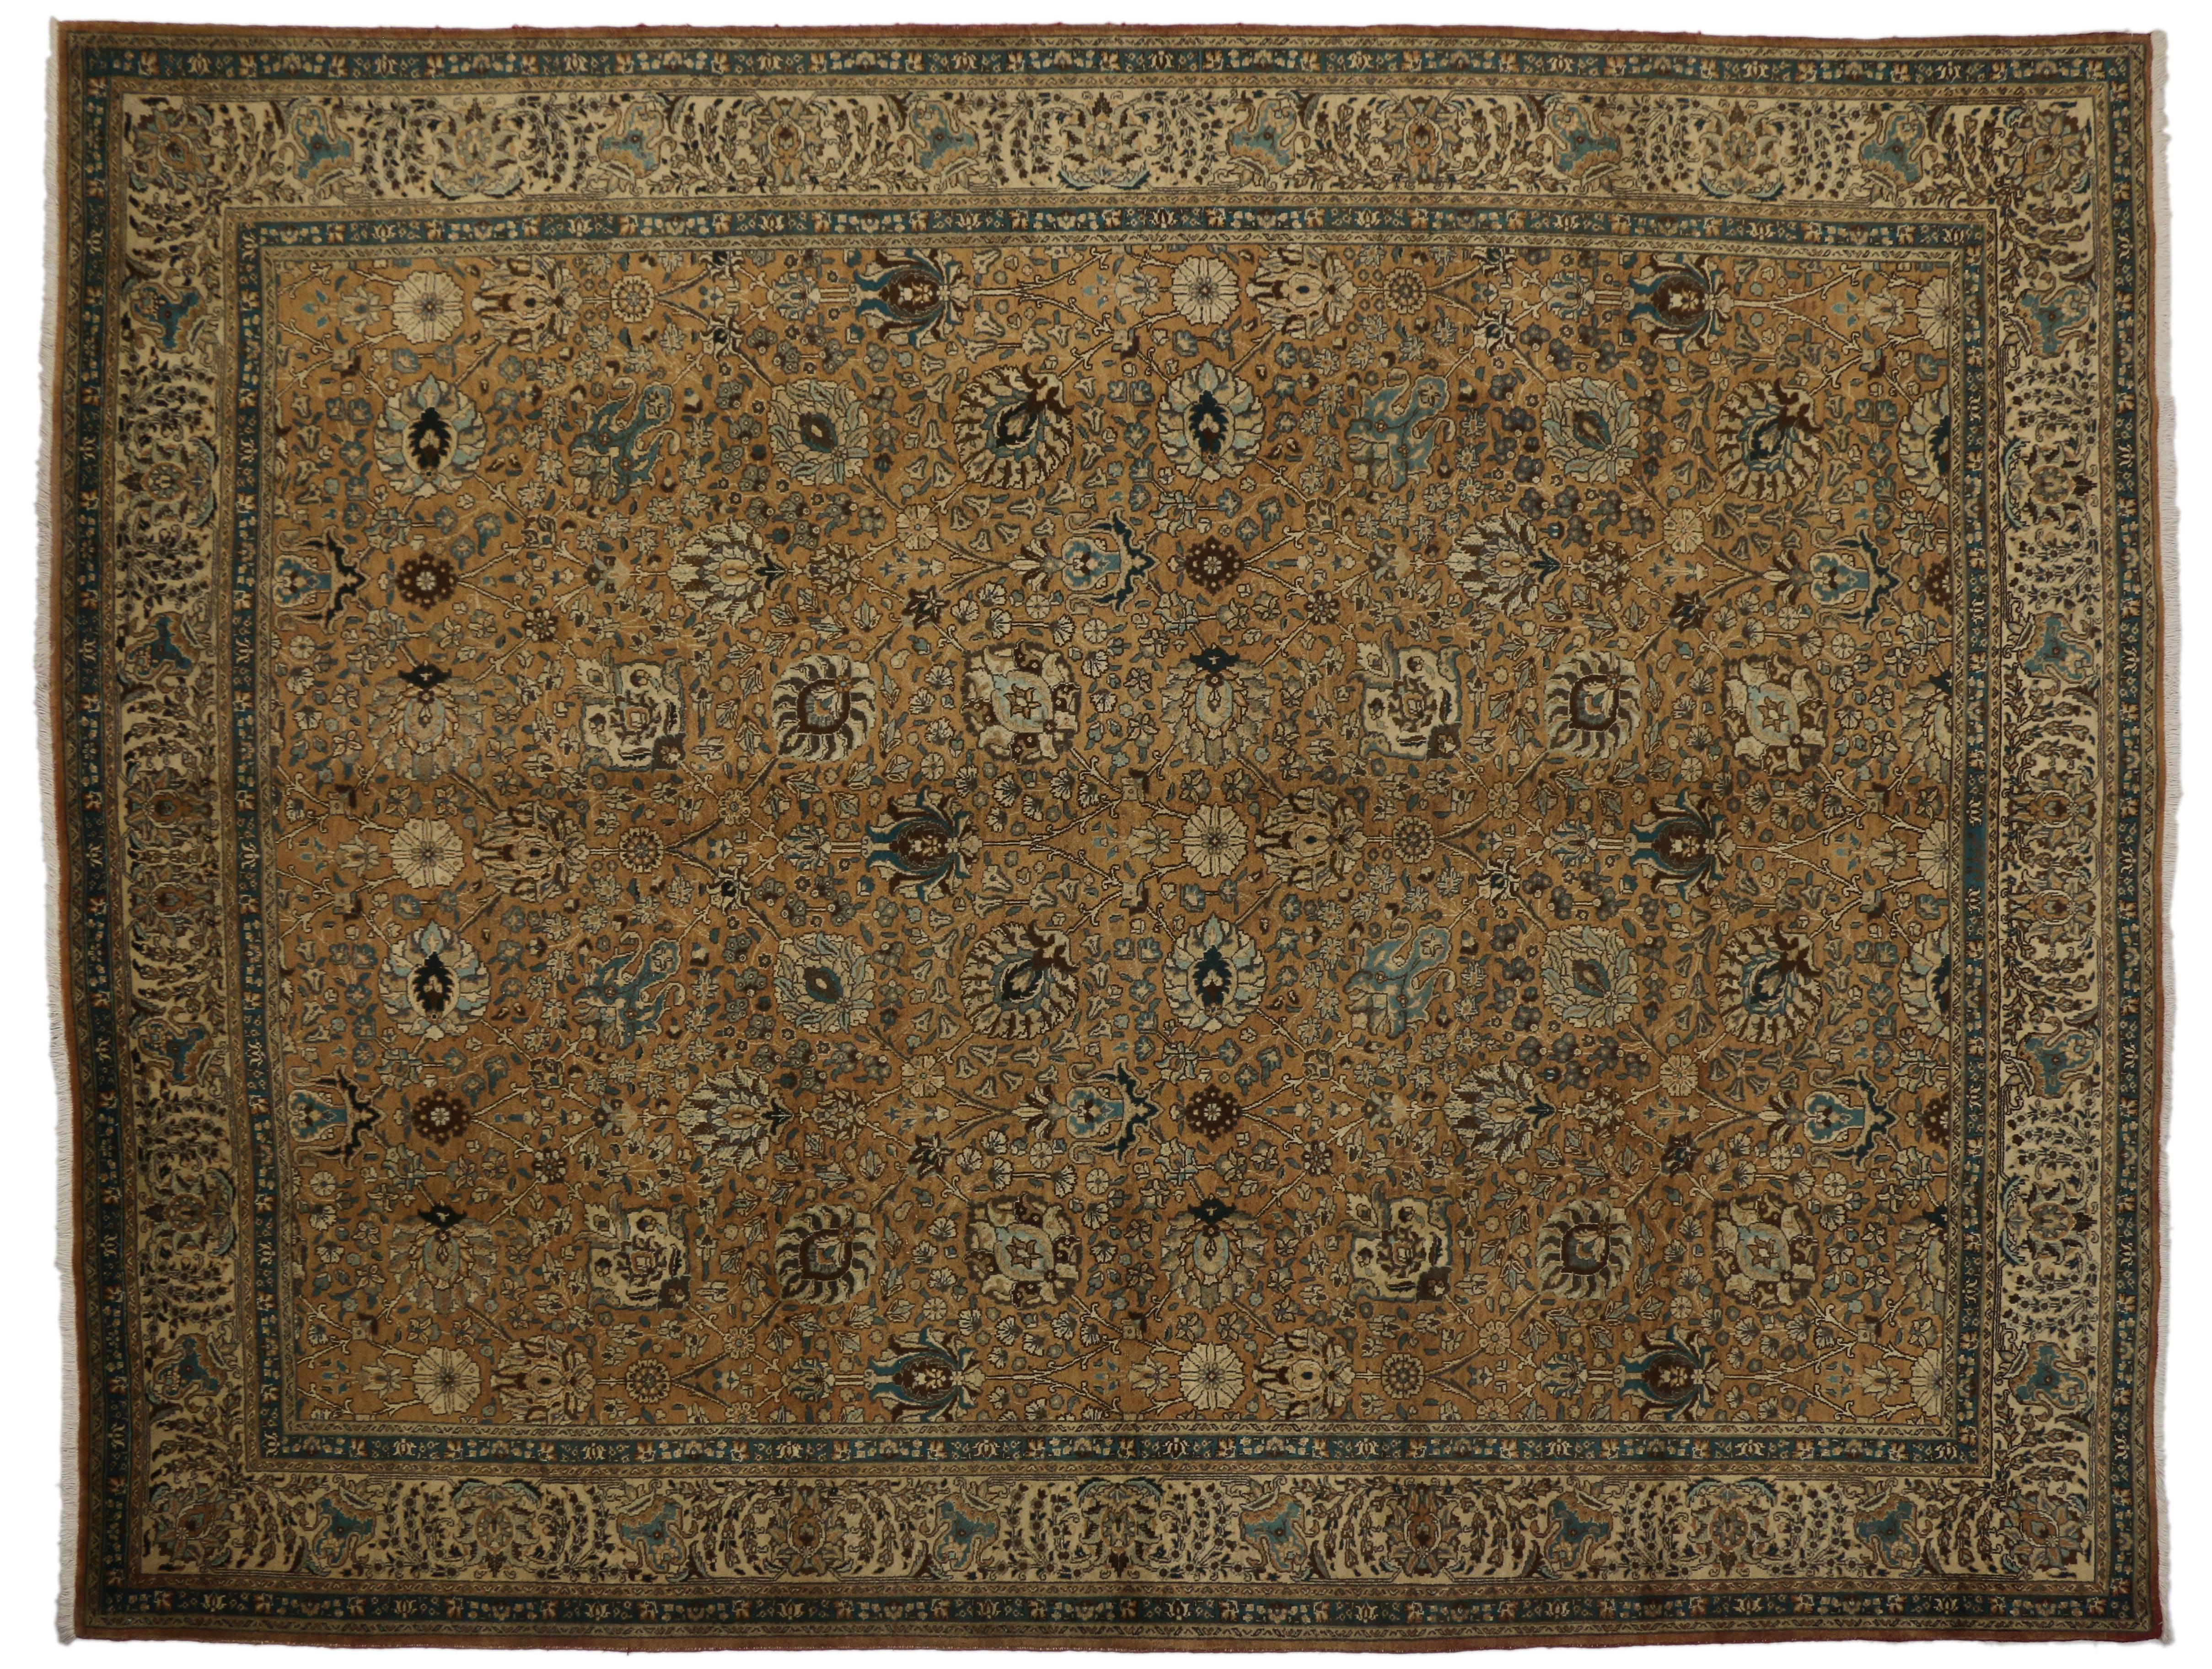 75603 Vintage Persian Tabriz Rug with Traditional Style in Light Colors. Embodying the highly decorative aesthetic, this vintage Persian Tabriz rug displays a traditional style in light colors. Featuring a tastefully casual presence and